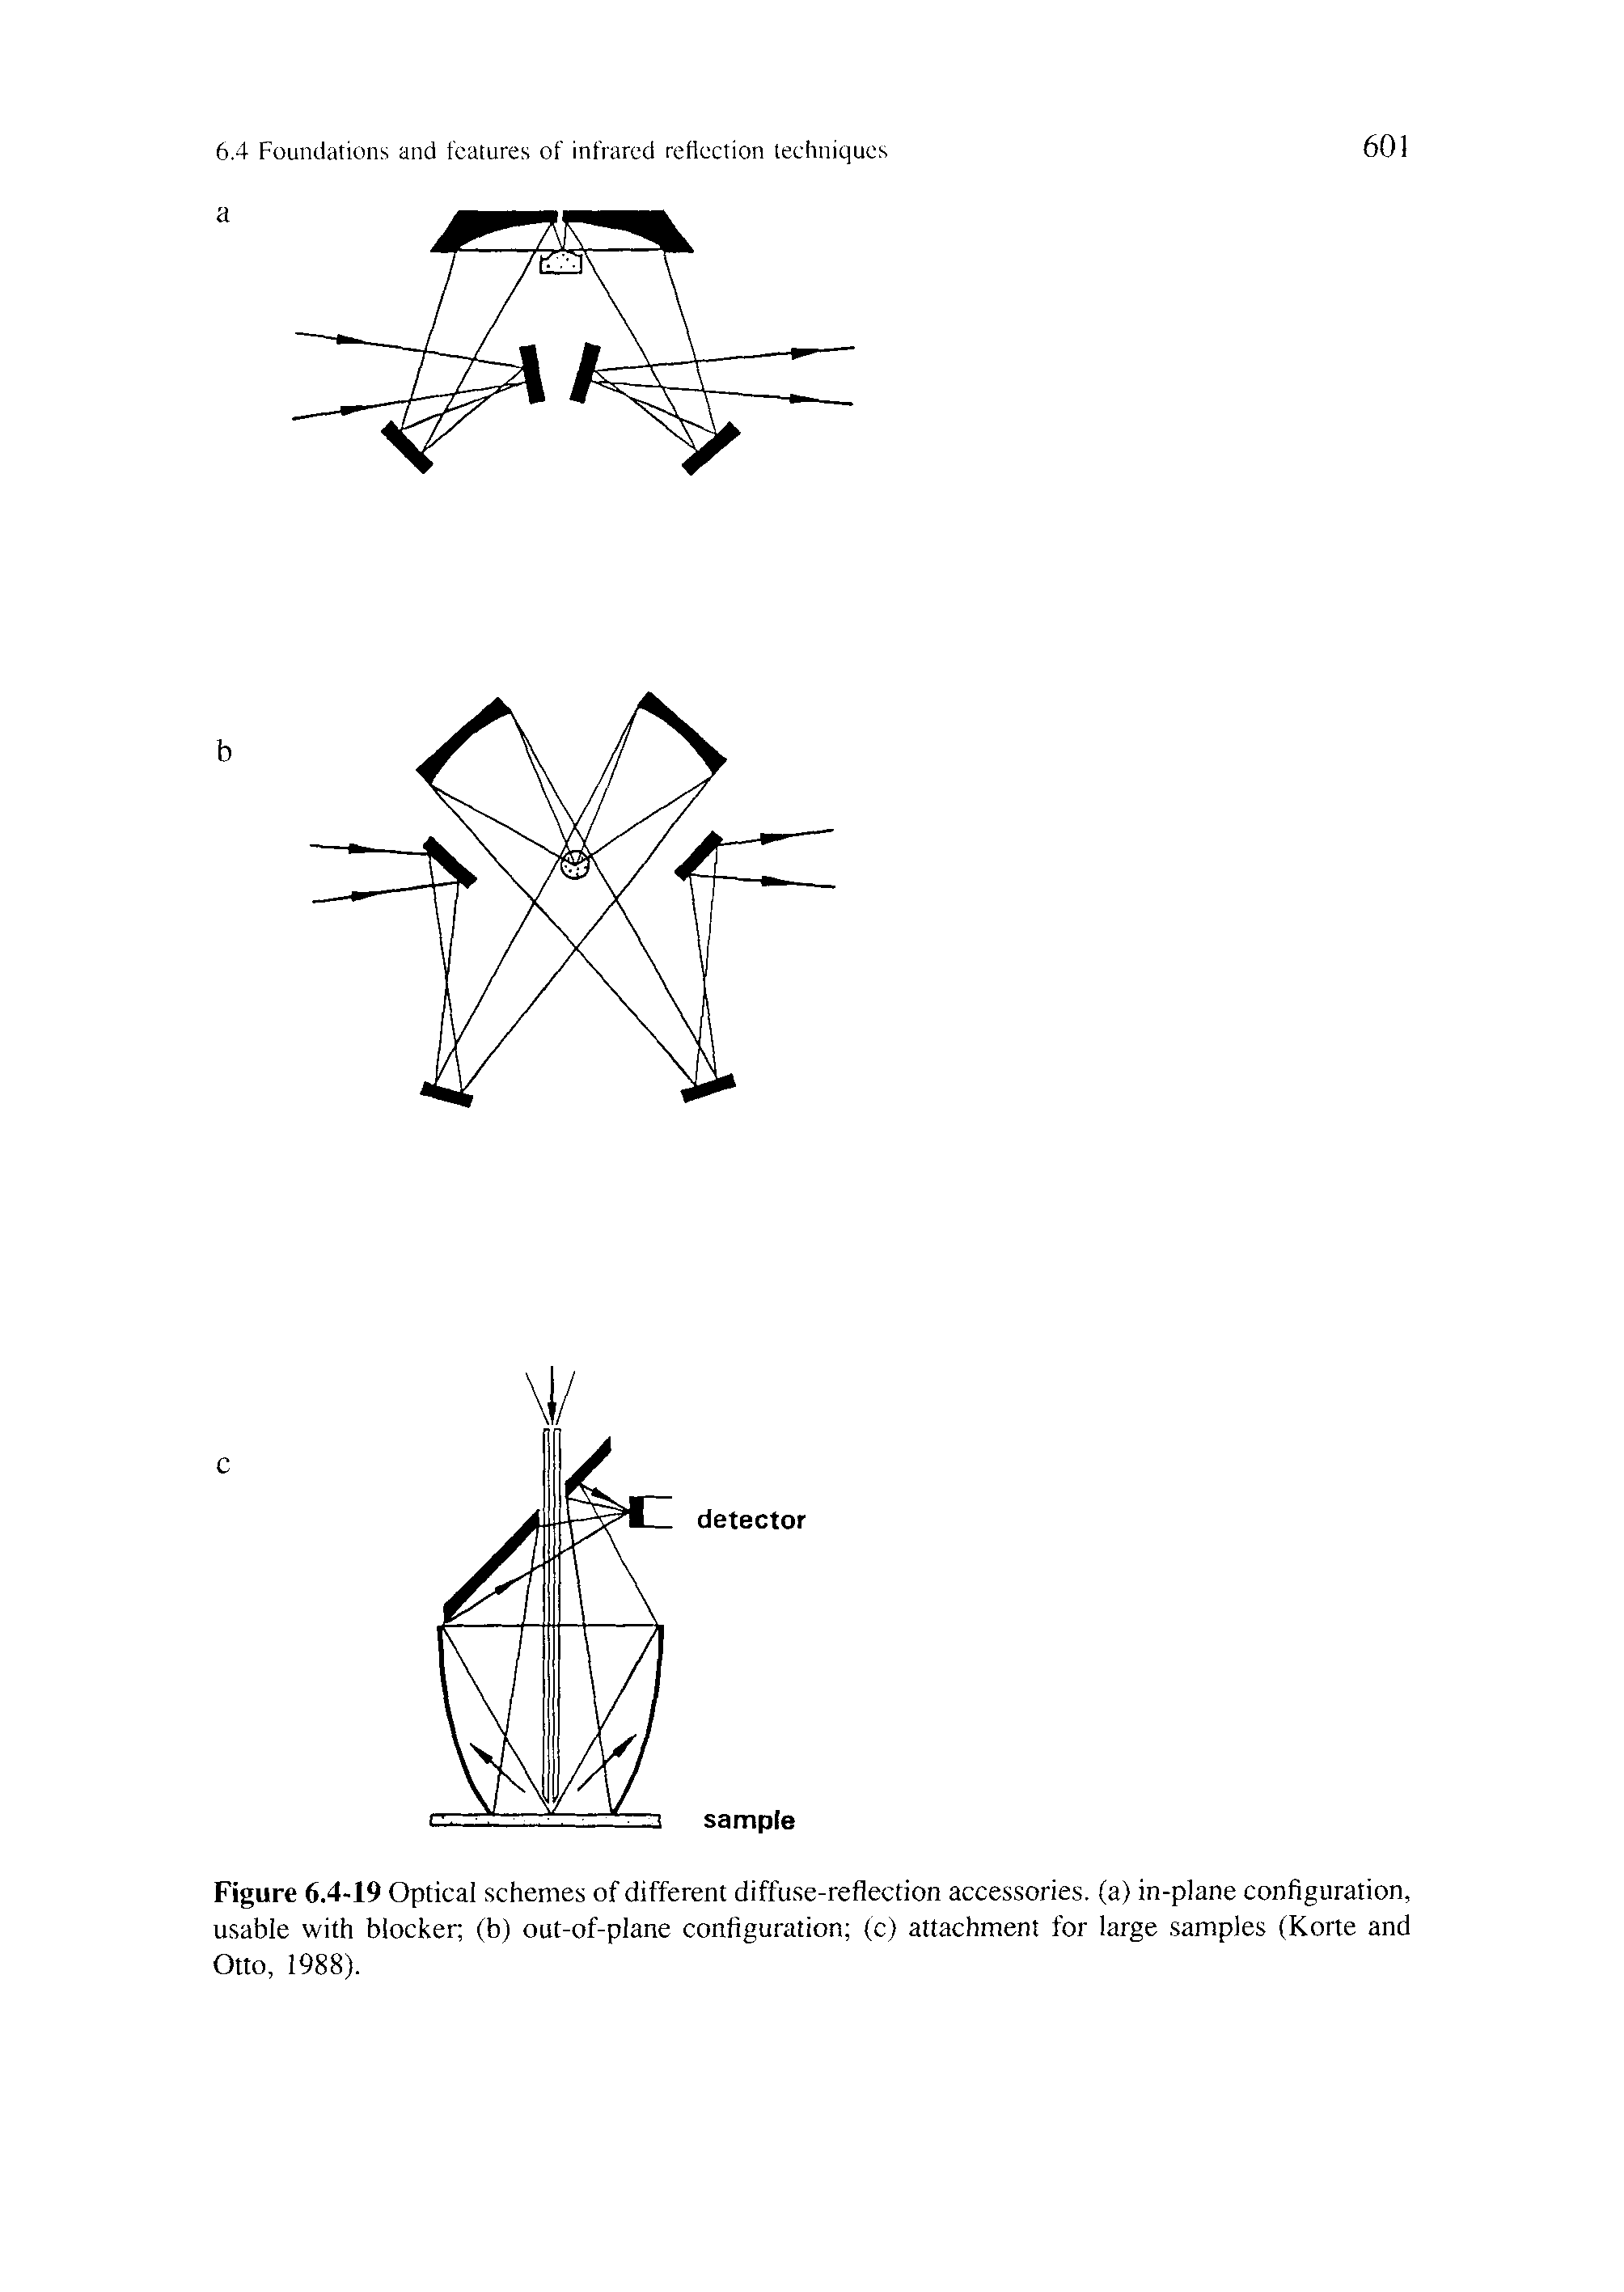 Figure 6.4-19 Optical schemes of different diffuse-reflection accessories, (a) in-plane configuration, usable with blocker (b) out-of-plane configuration (c) attachment for large samples (Korte and Otto, 1988).